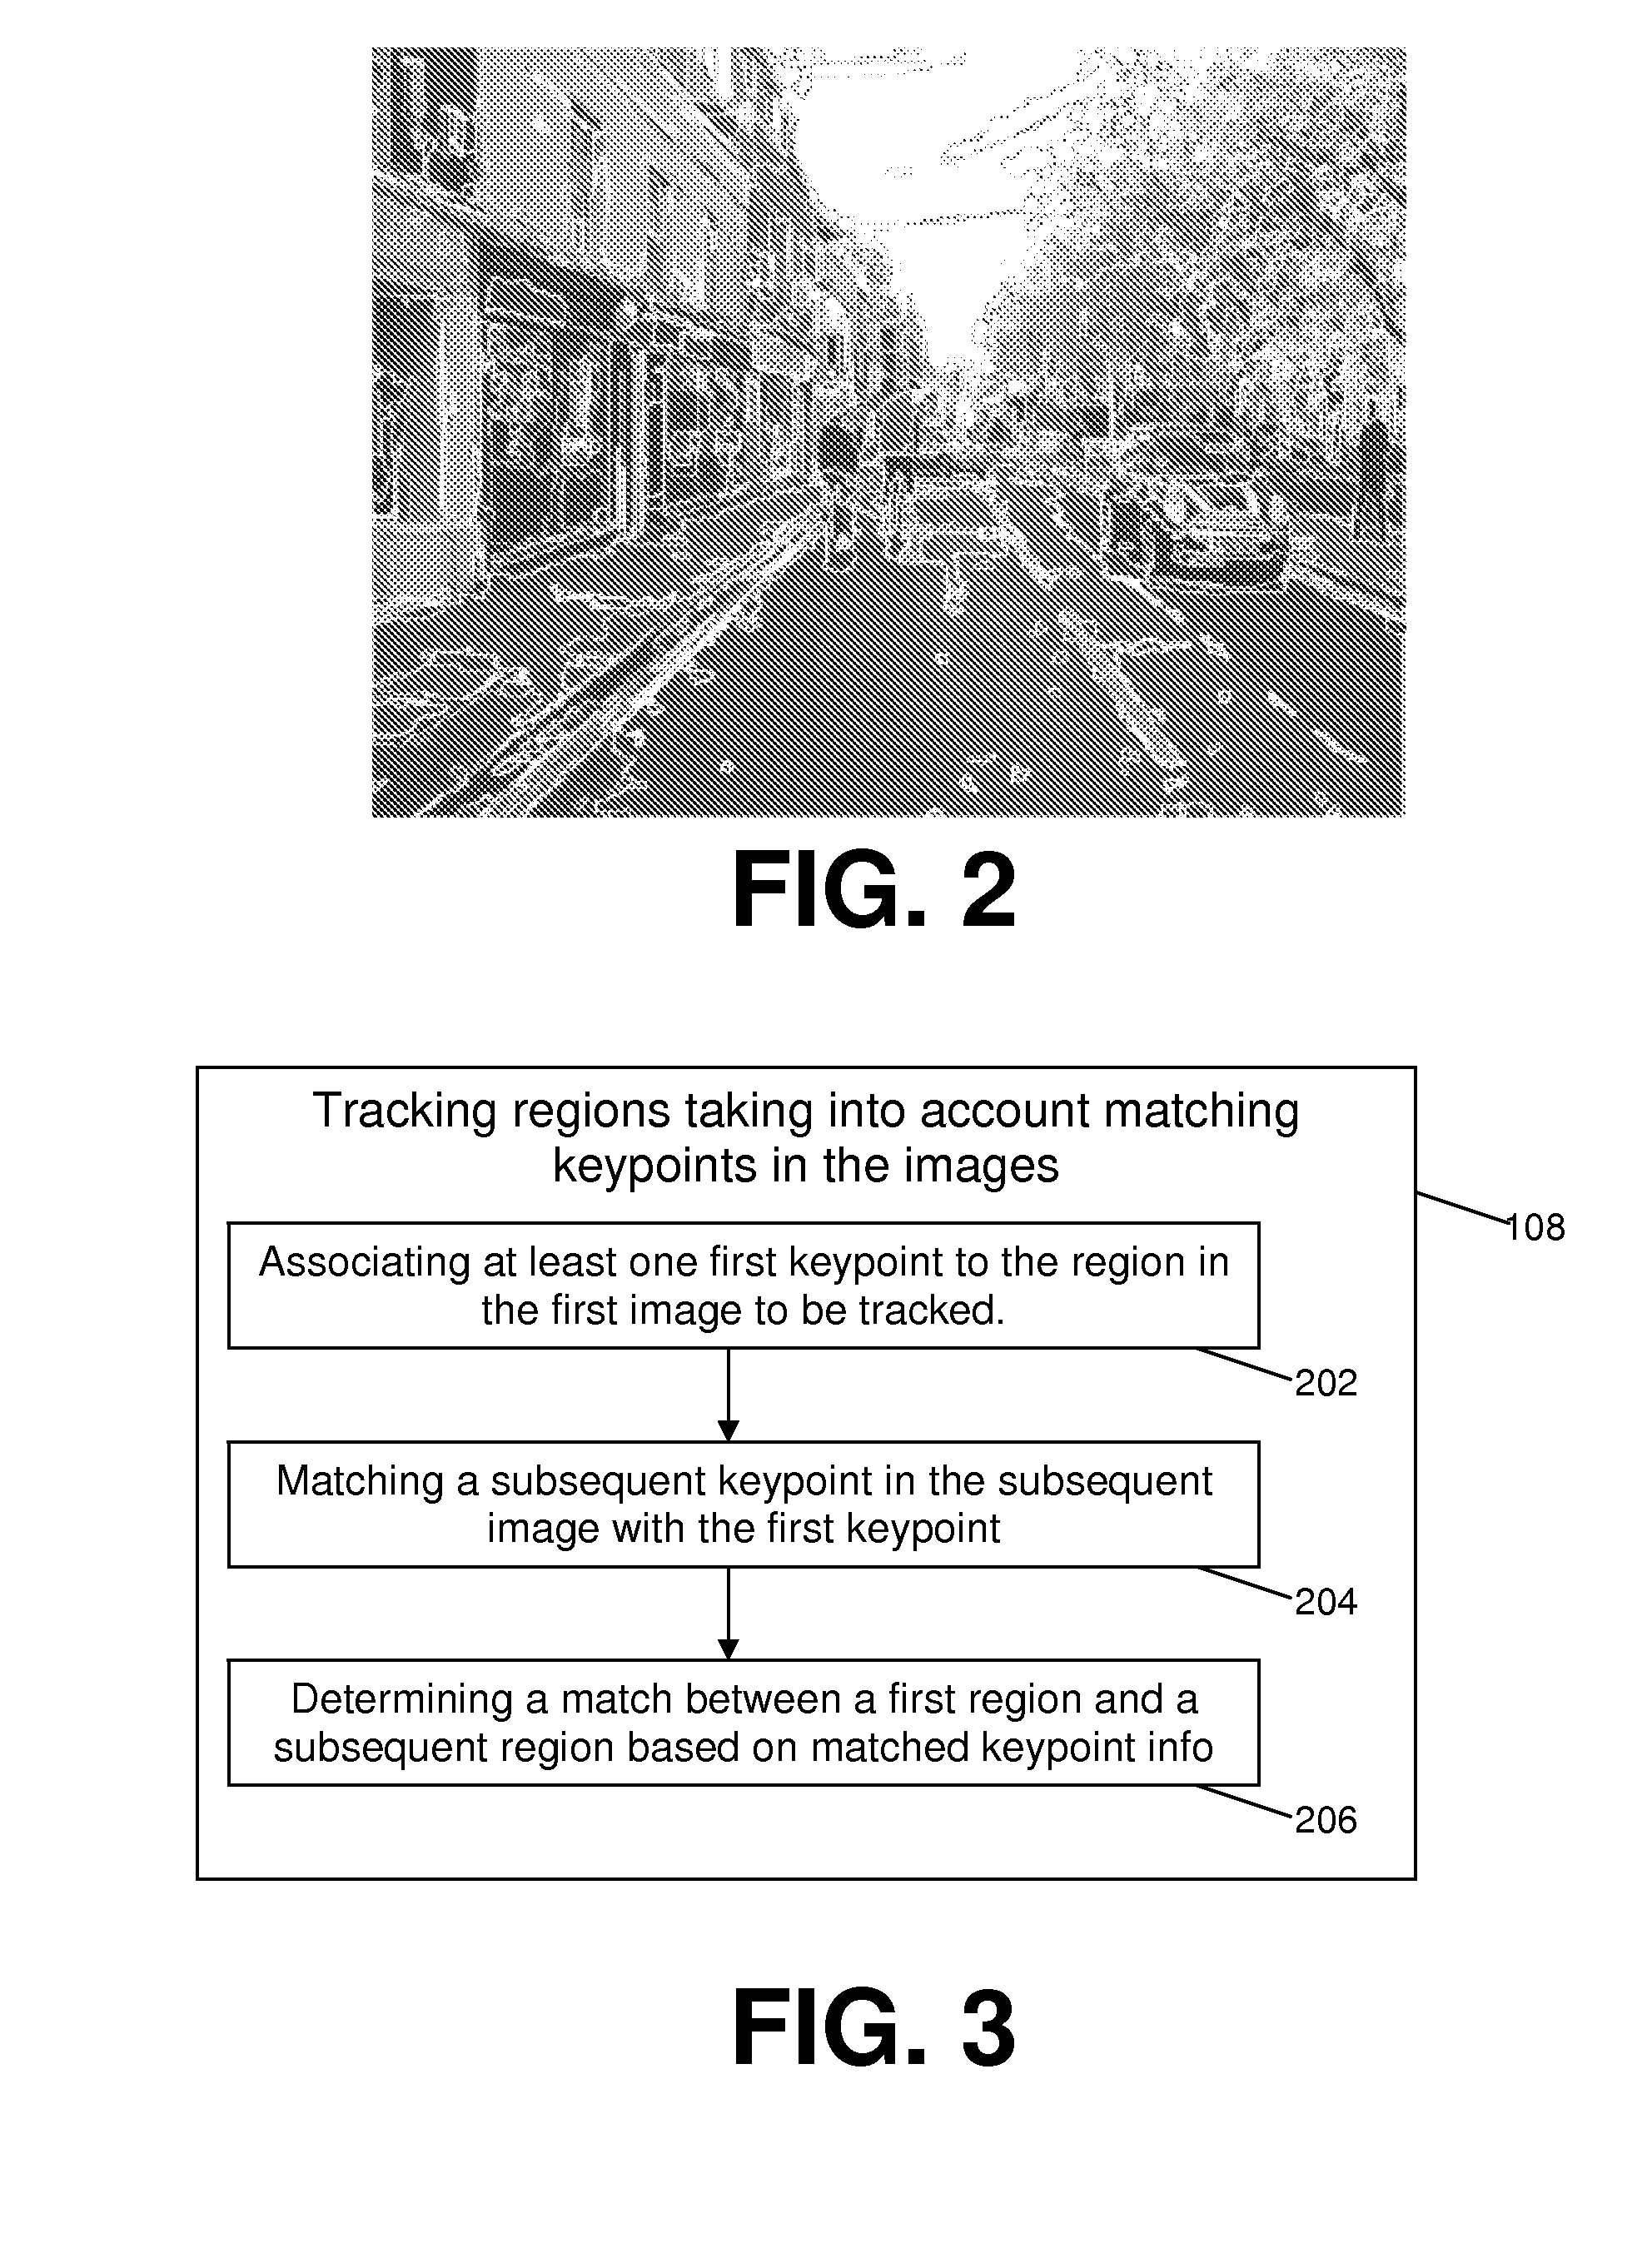 Methods and systems for matching keypoints and tracking regions between frames of video data